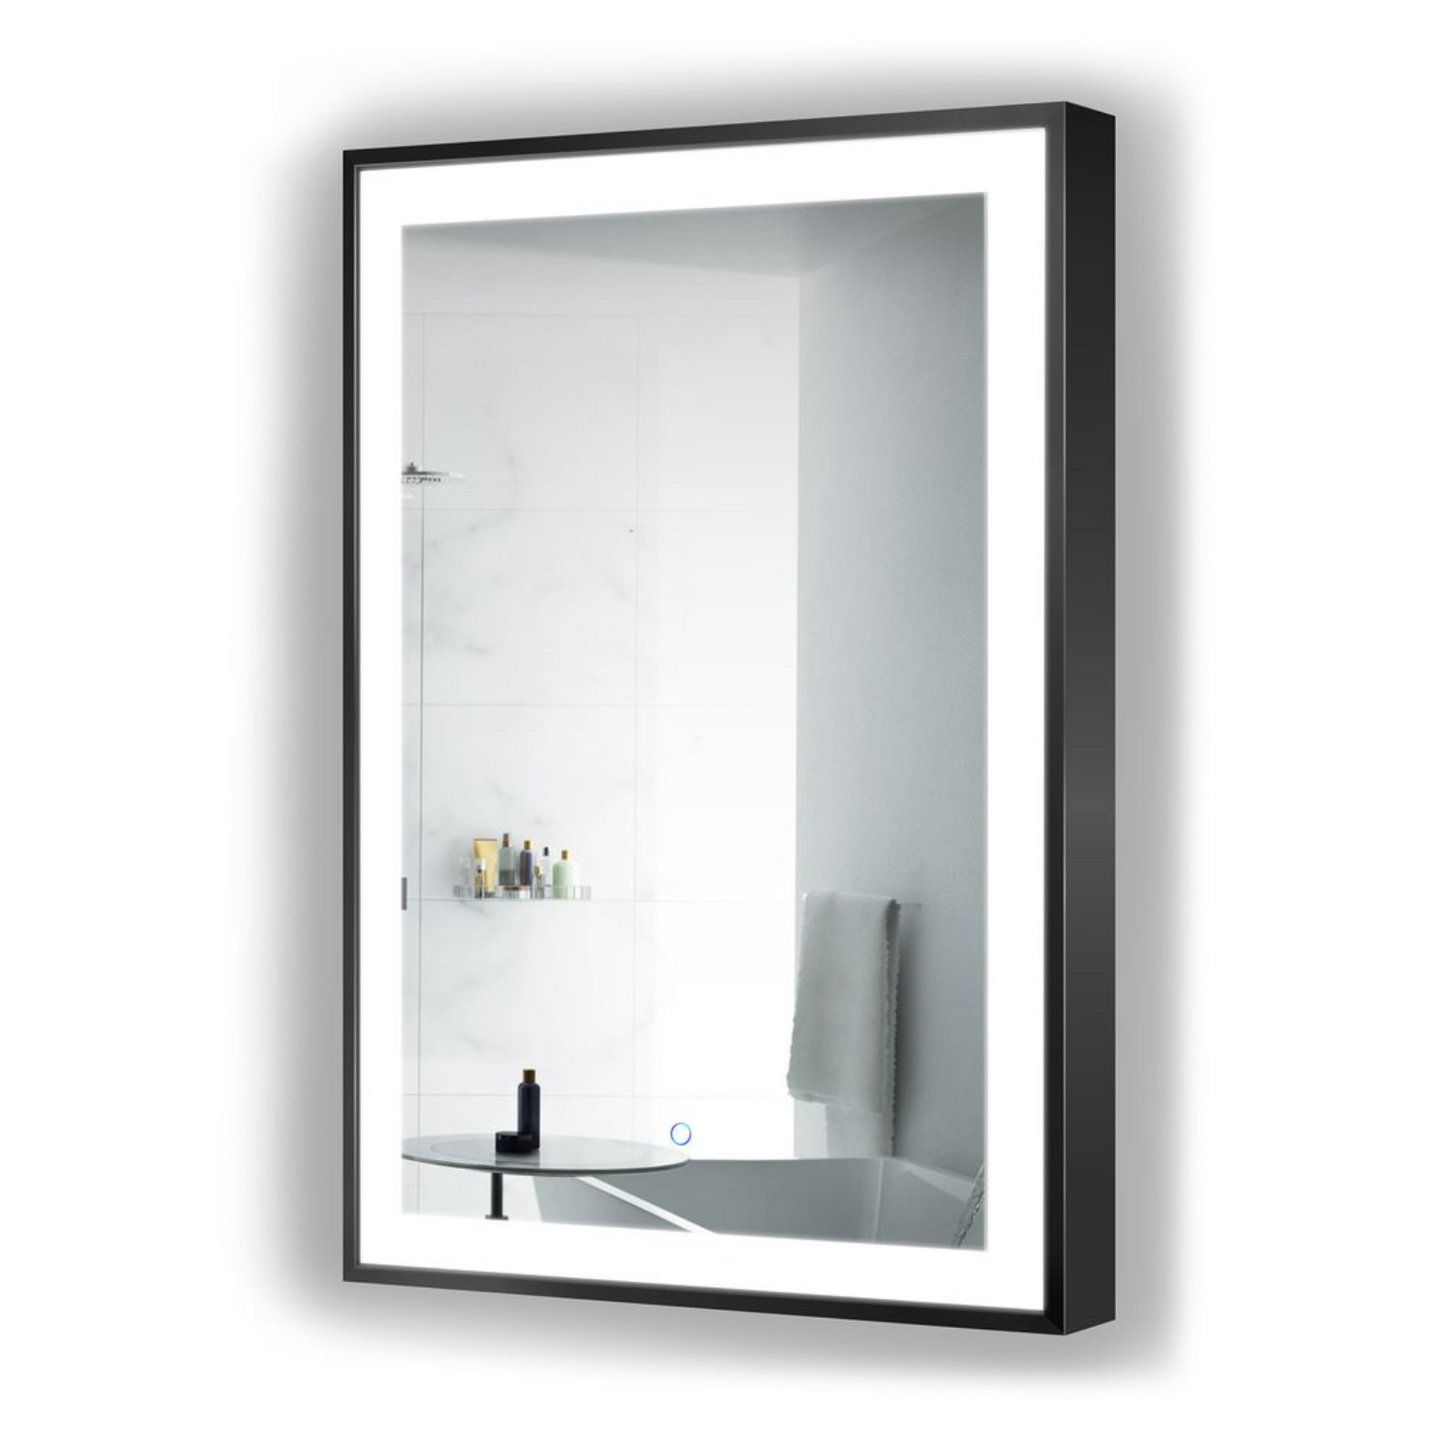 SOHO 24 X 36 Bathroom LED Mirror comes in Gold and Black Finishes